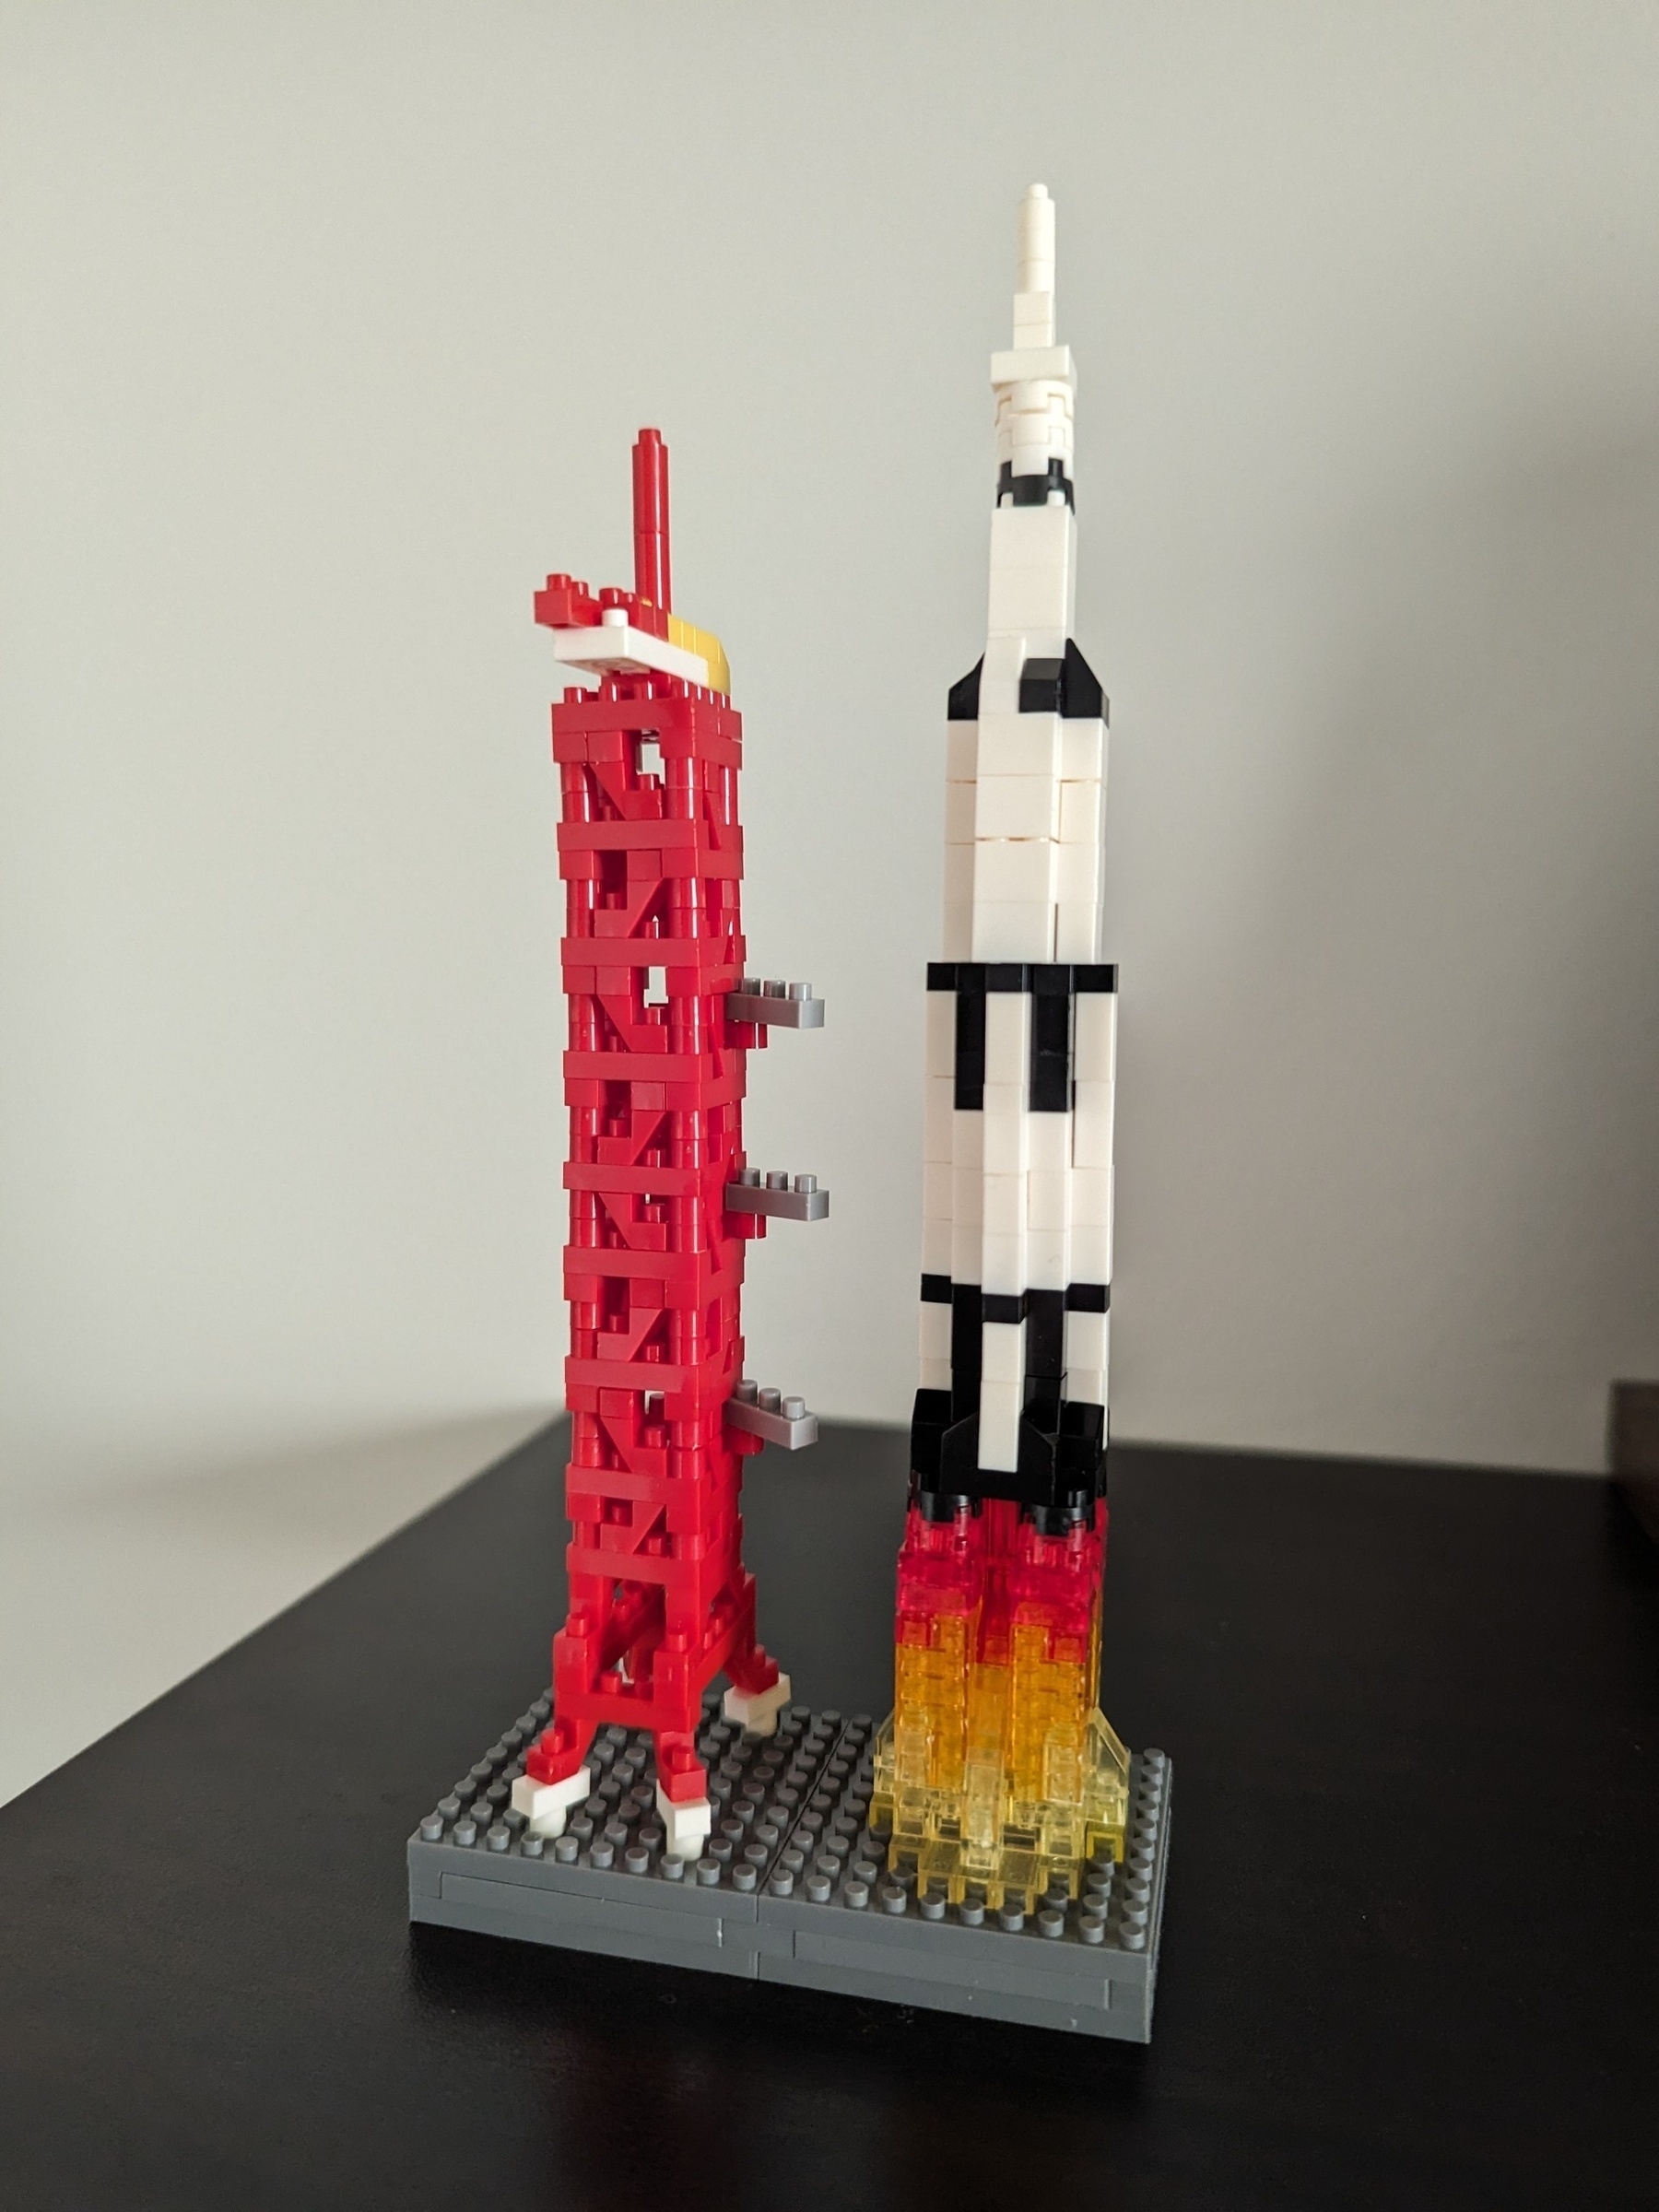 Six inch tall Lego model of a Saturn five rocket blasting off of a launch pad.